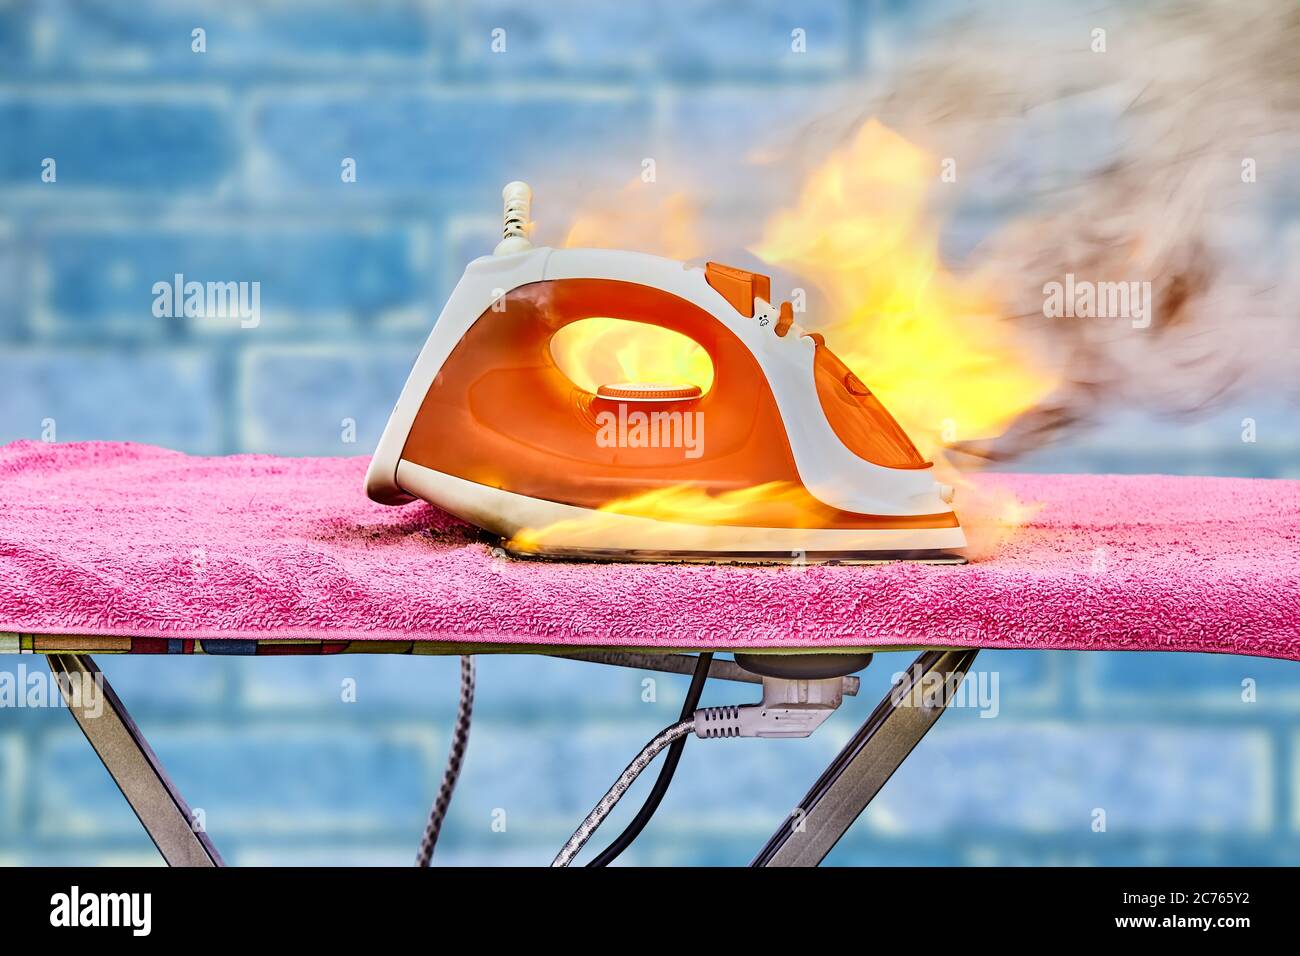 An accident with an ironing iron for clothes, device overheated and caught fire. Ignition of a household electrical appliance at home. Burning propert Stock Photo